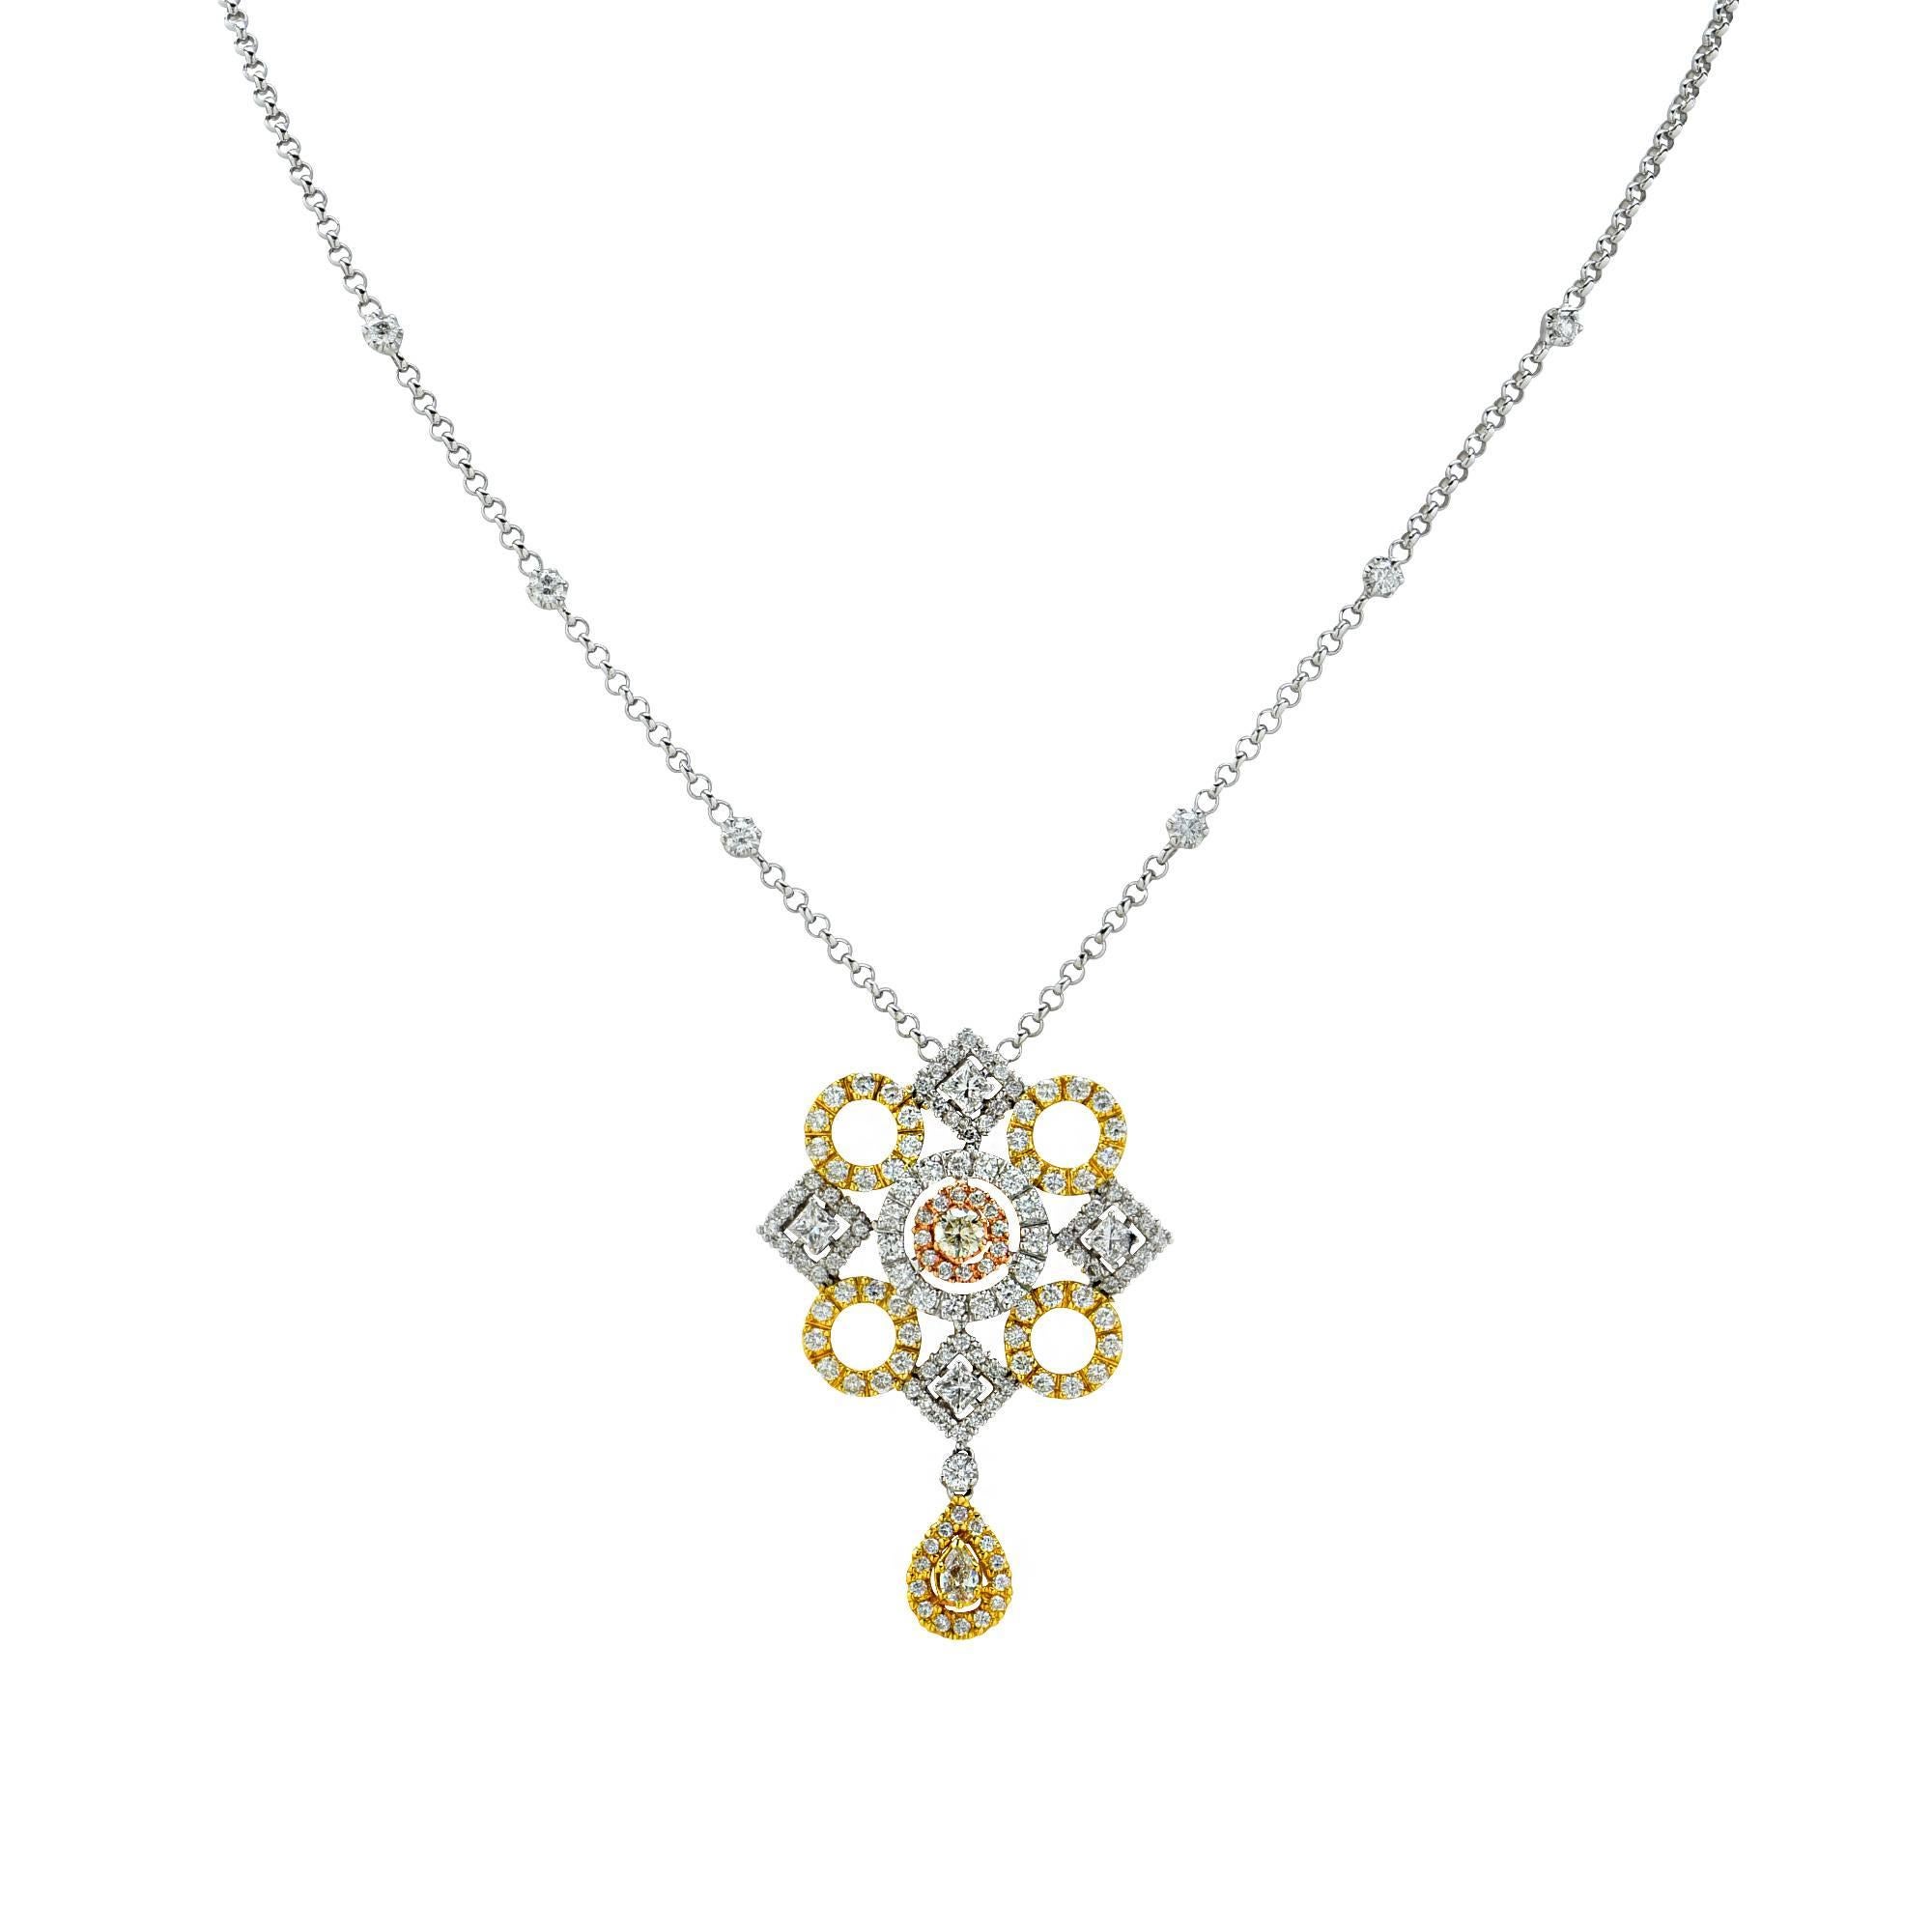 18k white and yellow gold necklace featuring 140 round brilliant, princess and pear shape cut diamonds weighing approximately 2.30cts total, G color, VS clarity.

Metal weight: 8.70 grams

This diamond pendant and necklace is accompanied by a